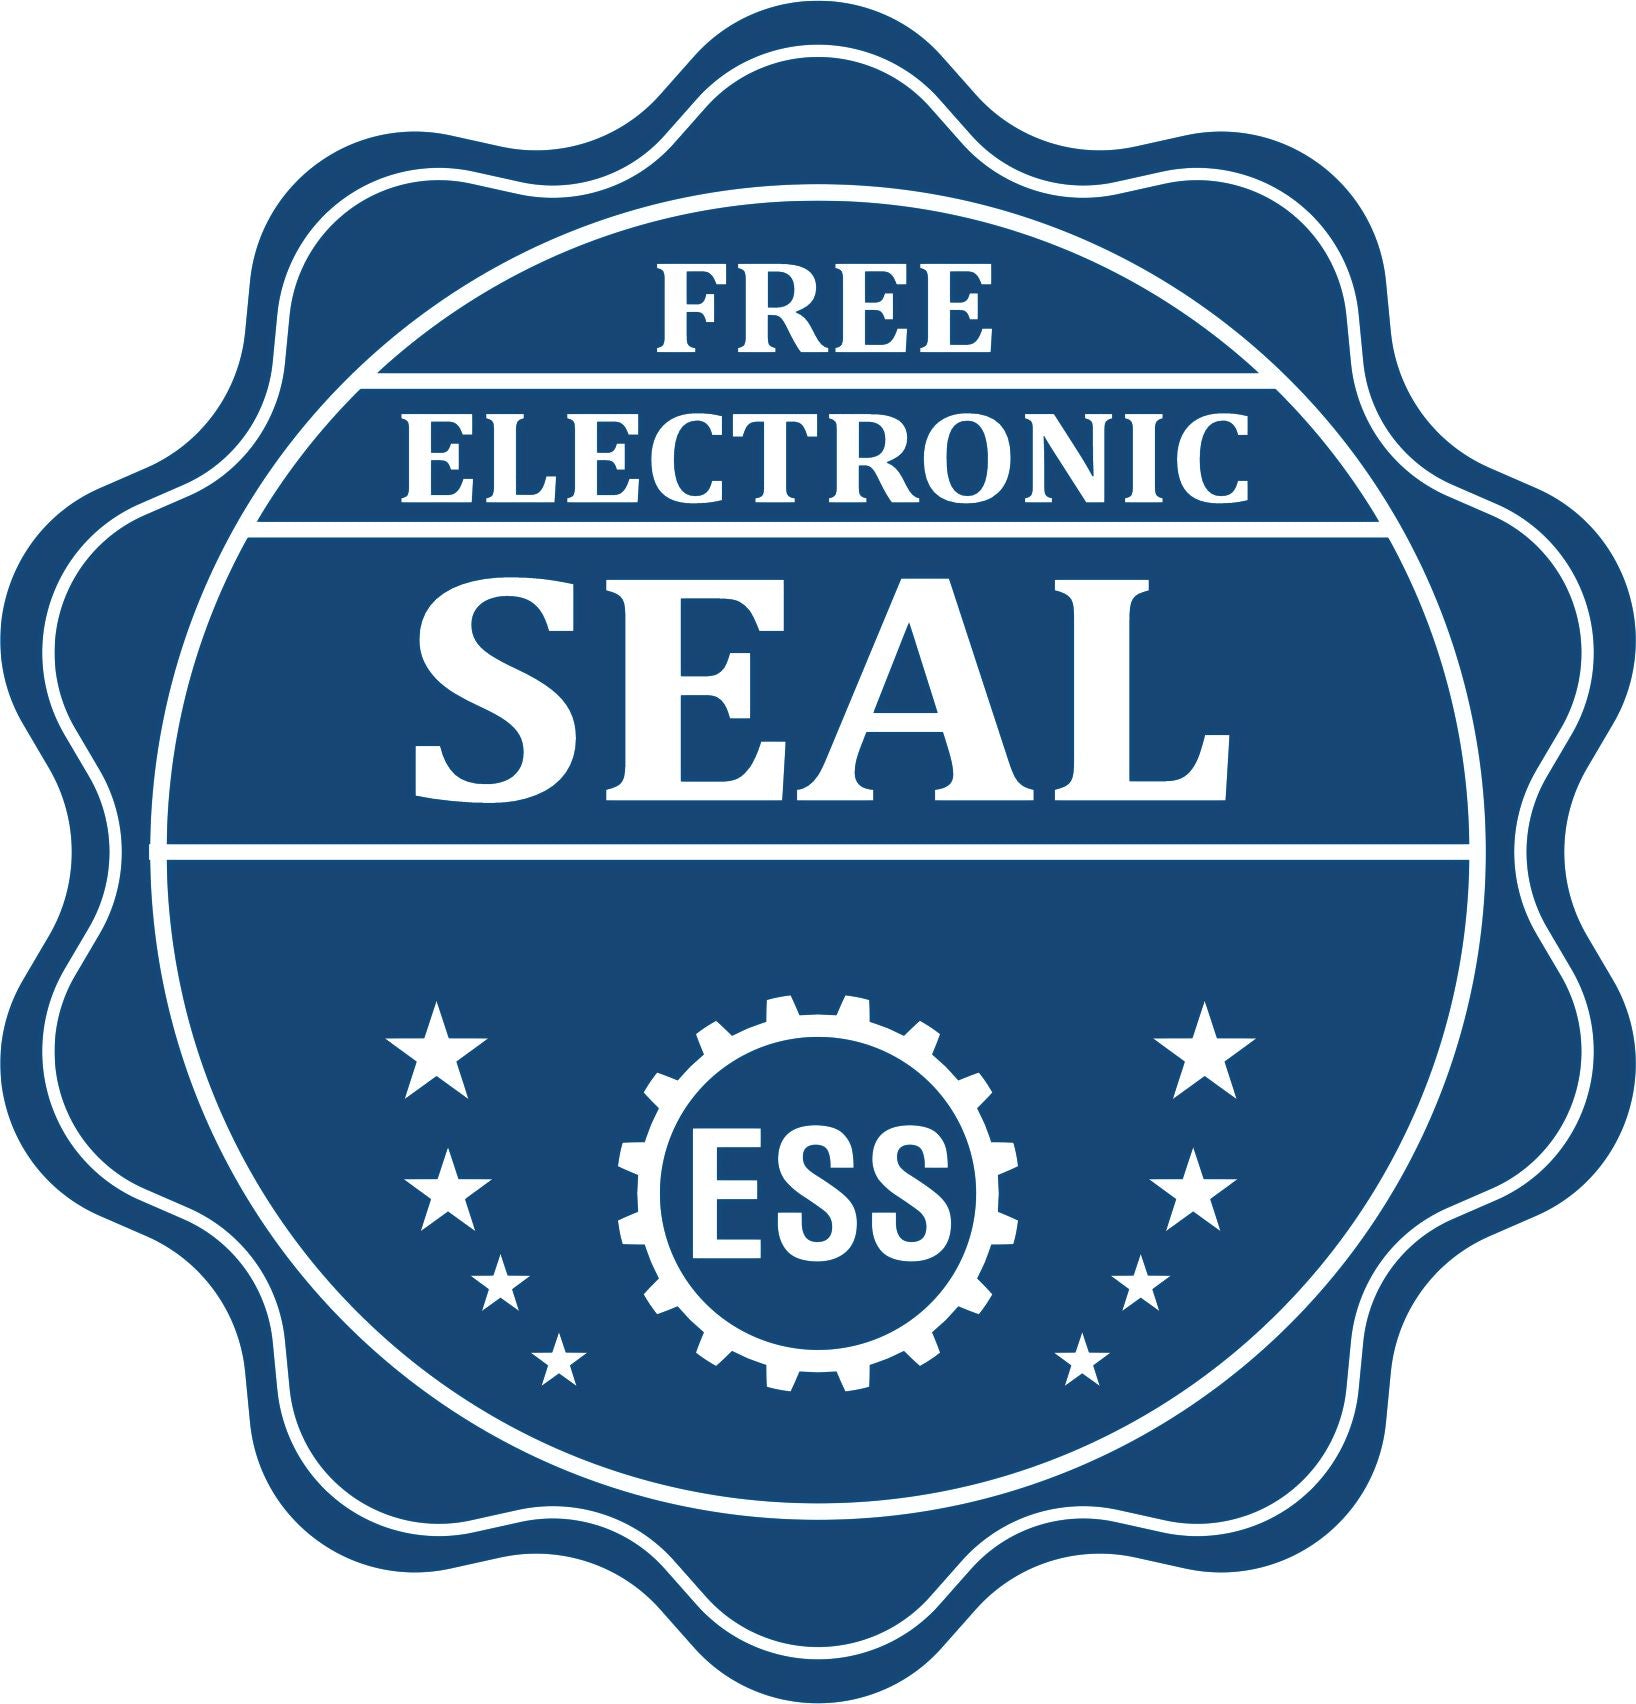 A badge showing a free electronic seal for the Gift Utah Engineer Seal with stars and the ESS gear on the emblem.